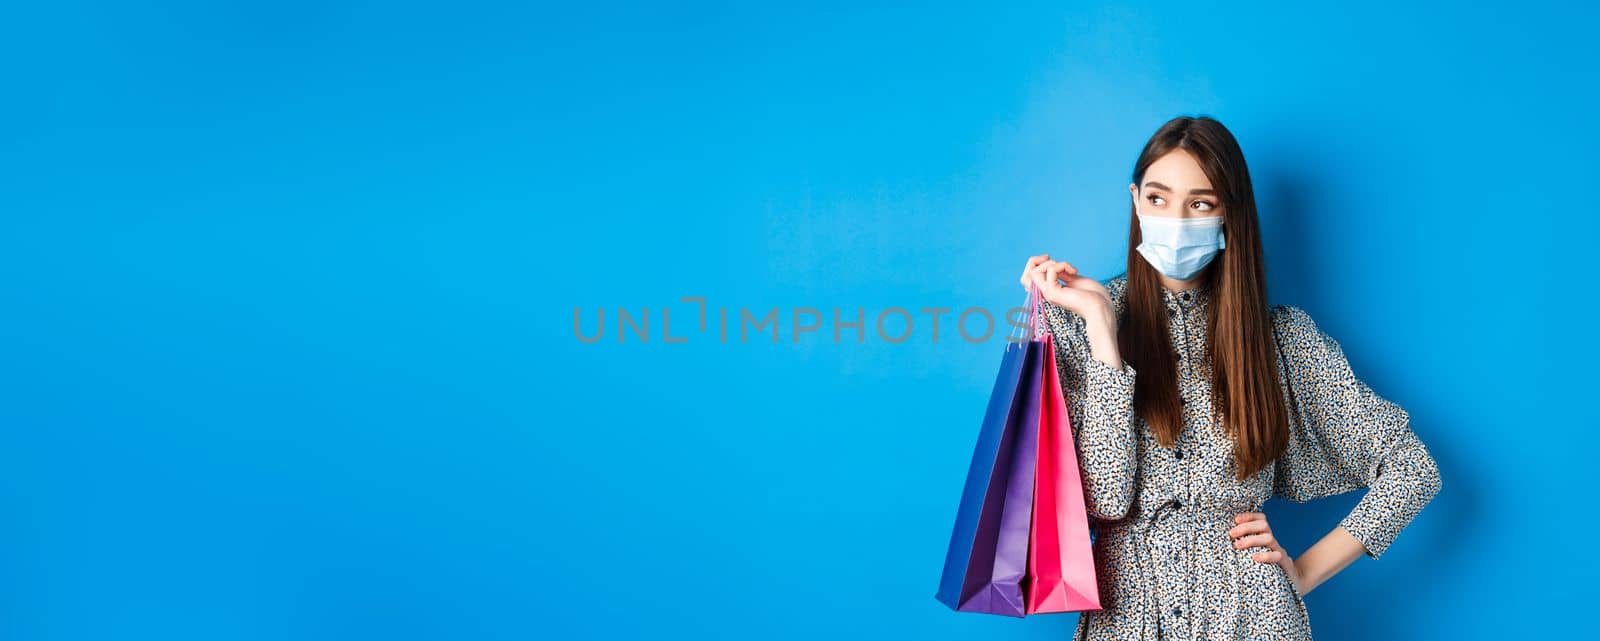 Covid-19, pandemic and lifestyle concept. Girl wearing medical mask on shopping in malls, holding paper bags and look aside at empty space, standing on blue background.